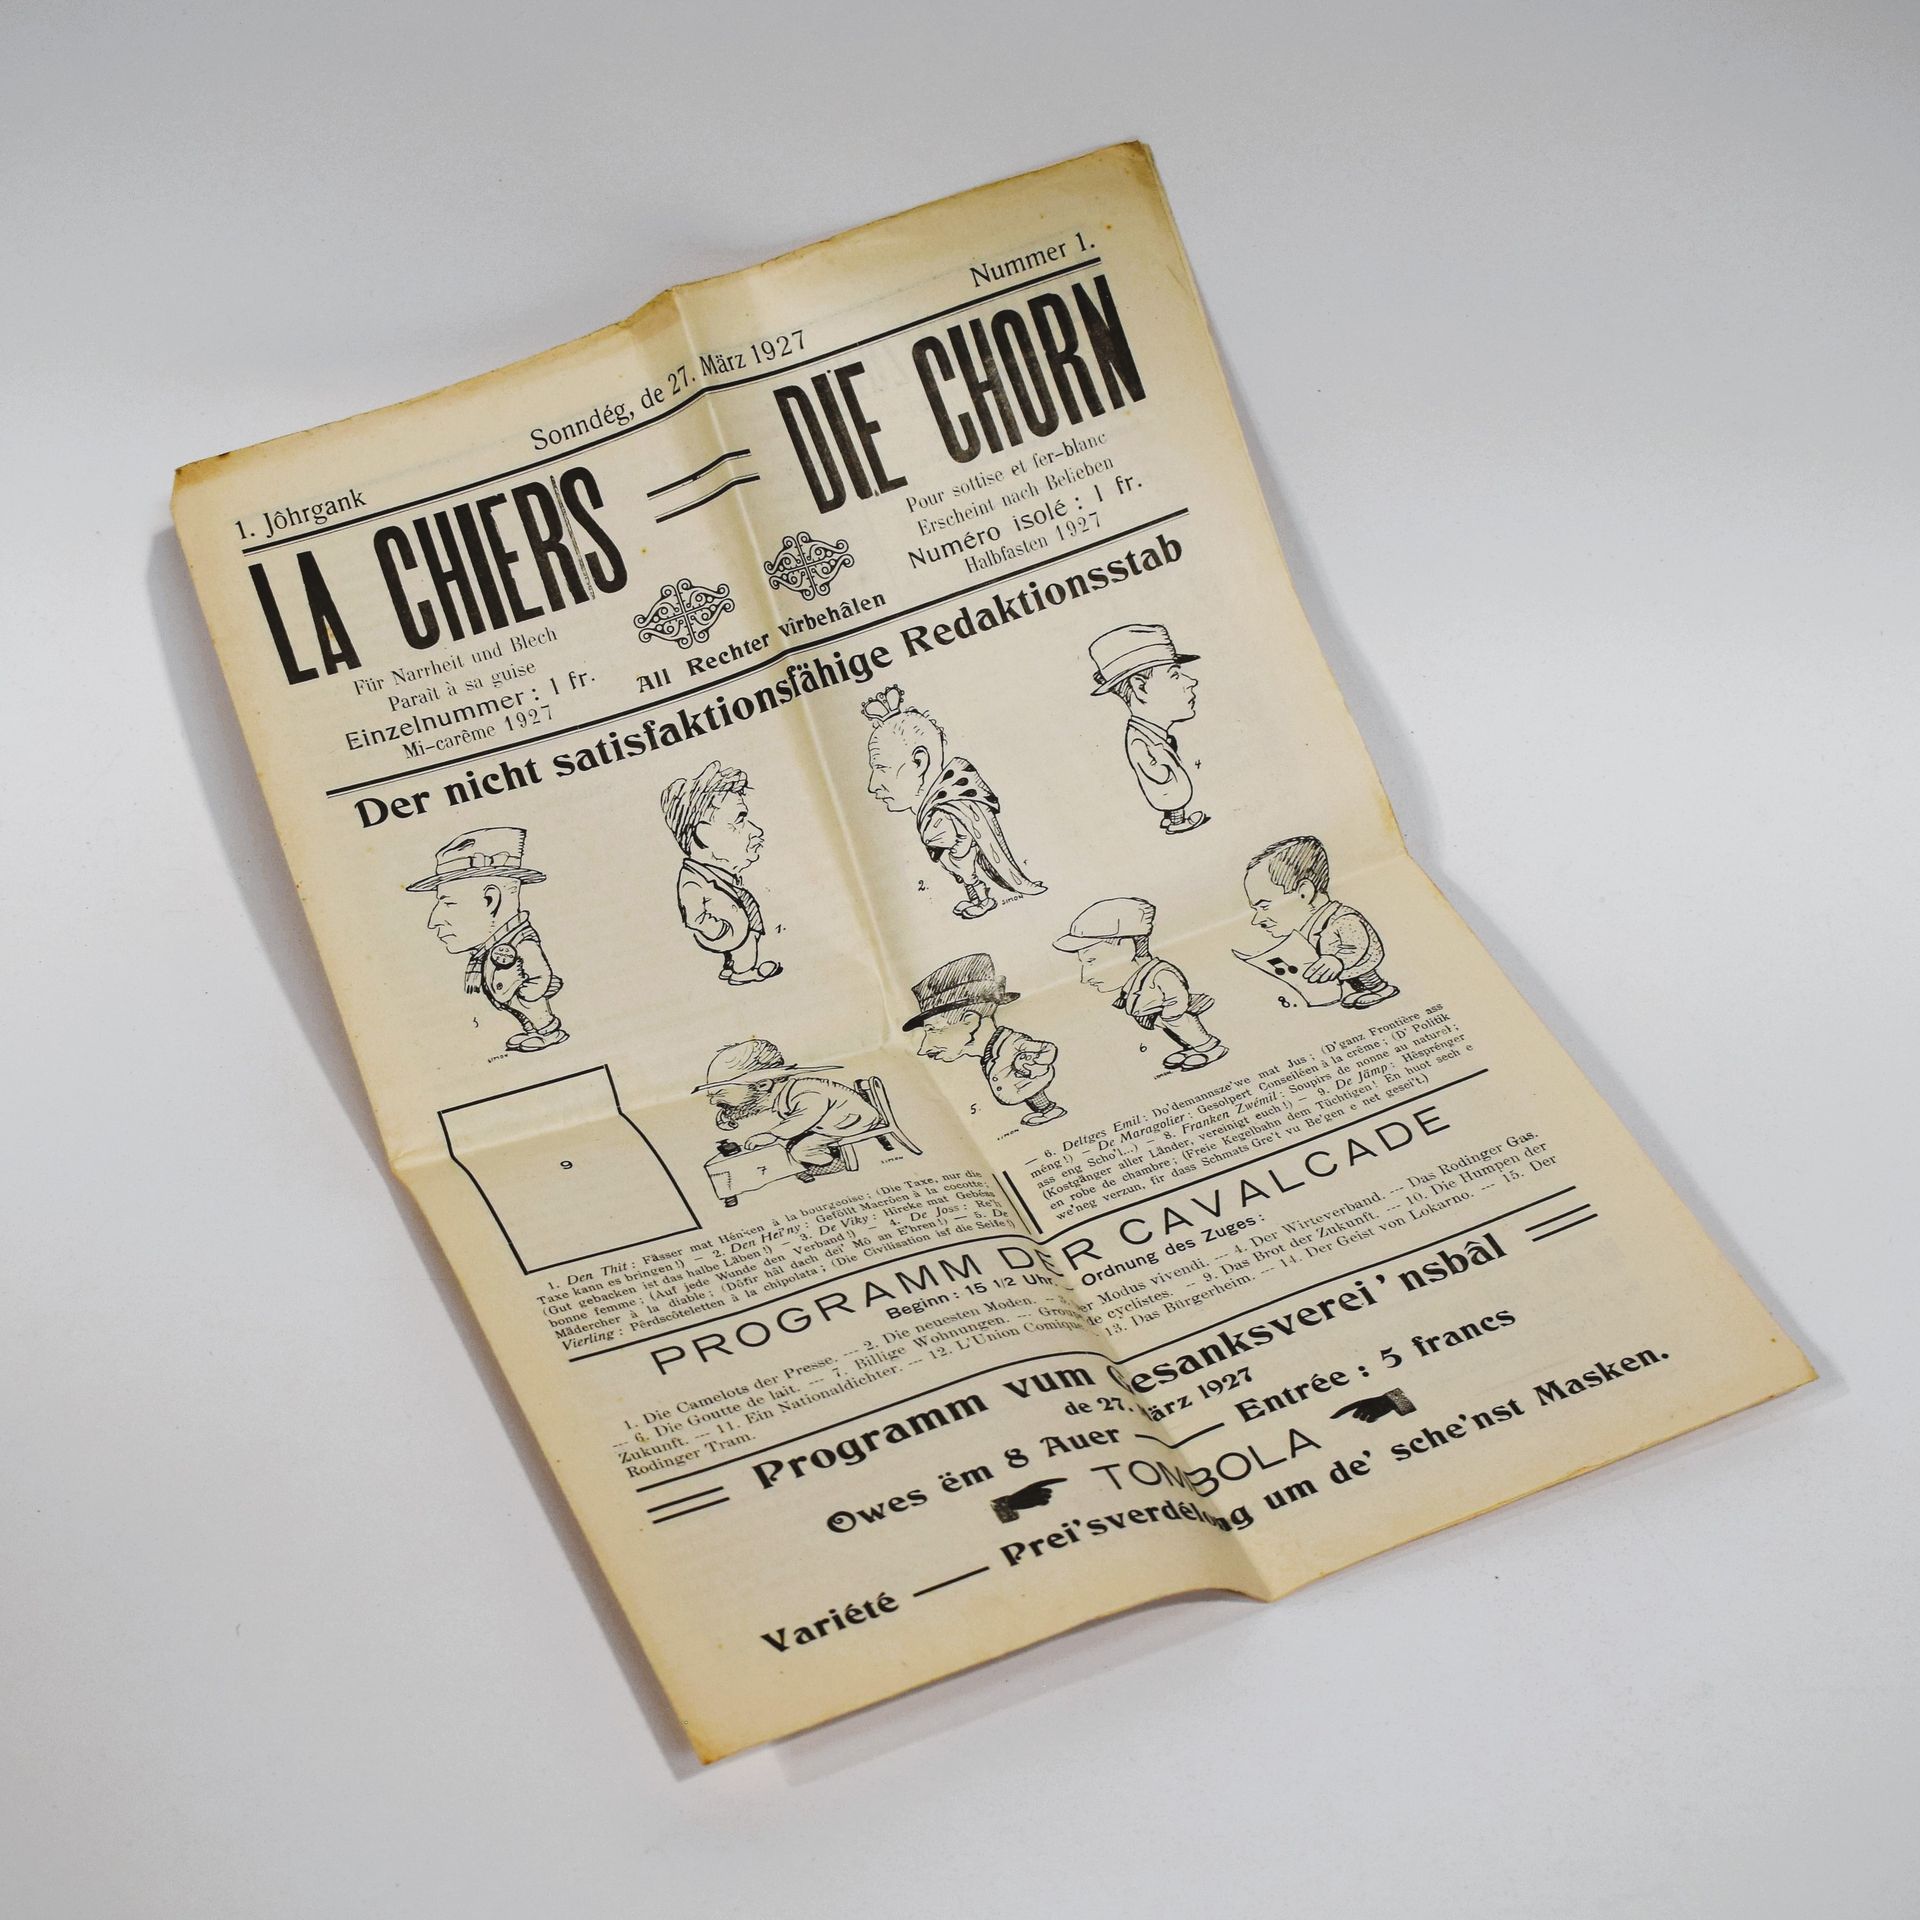 Null (JOURNAL) Number 1 of the first year of the newspaper "LA CHIERS=DIE CHORN"&hellip;